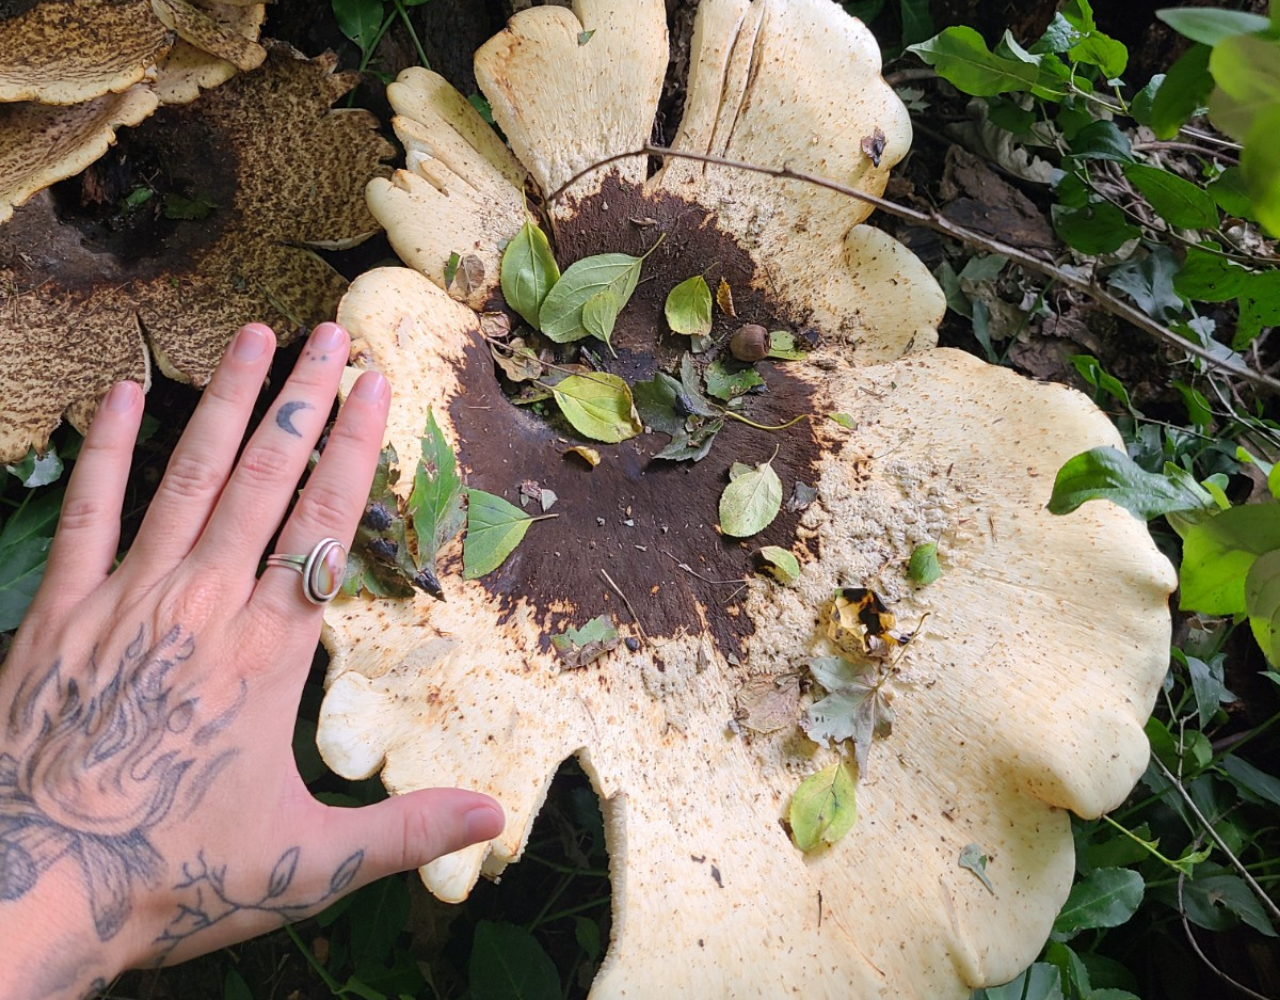 giant mushroom in the forest found by Kelsey of Magic Moon Mushrooms